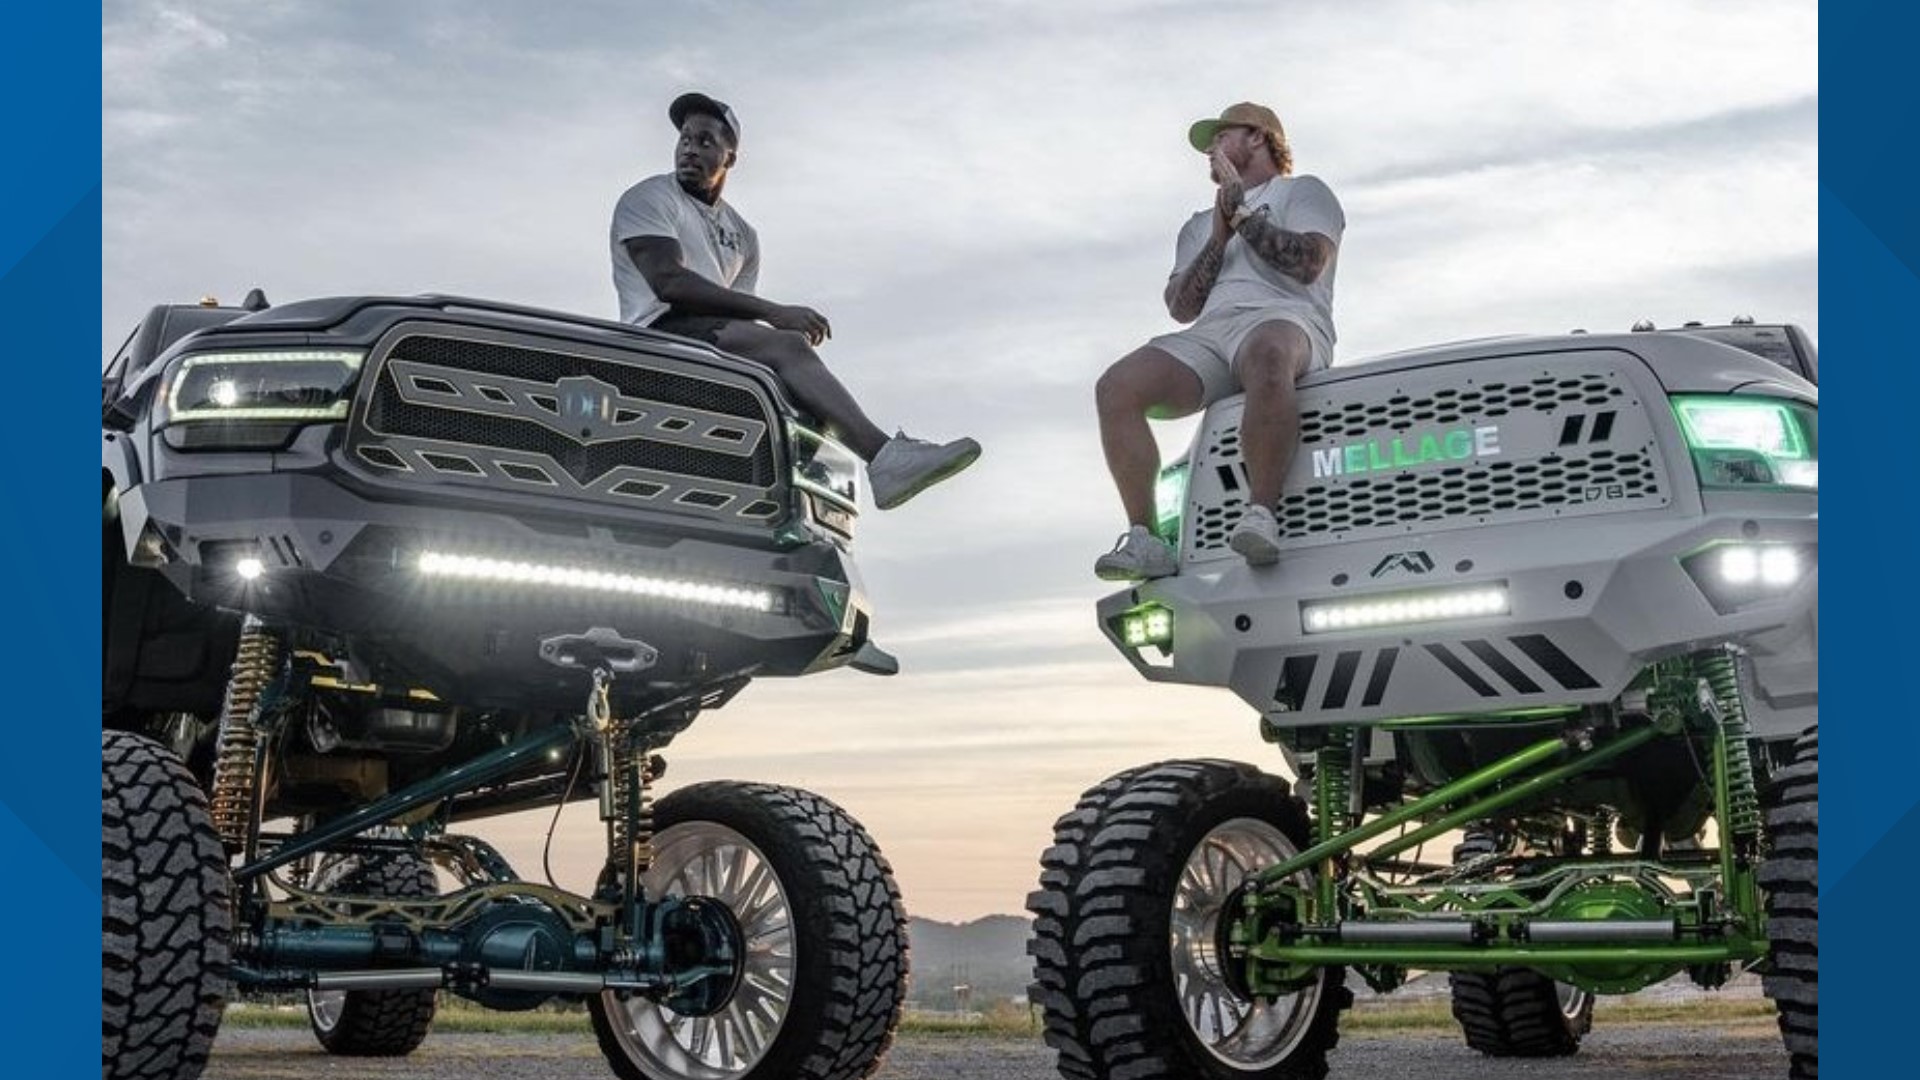 Derick Hall knows his motor on the field is just as powerful as his custom truck.